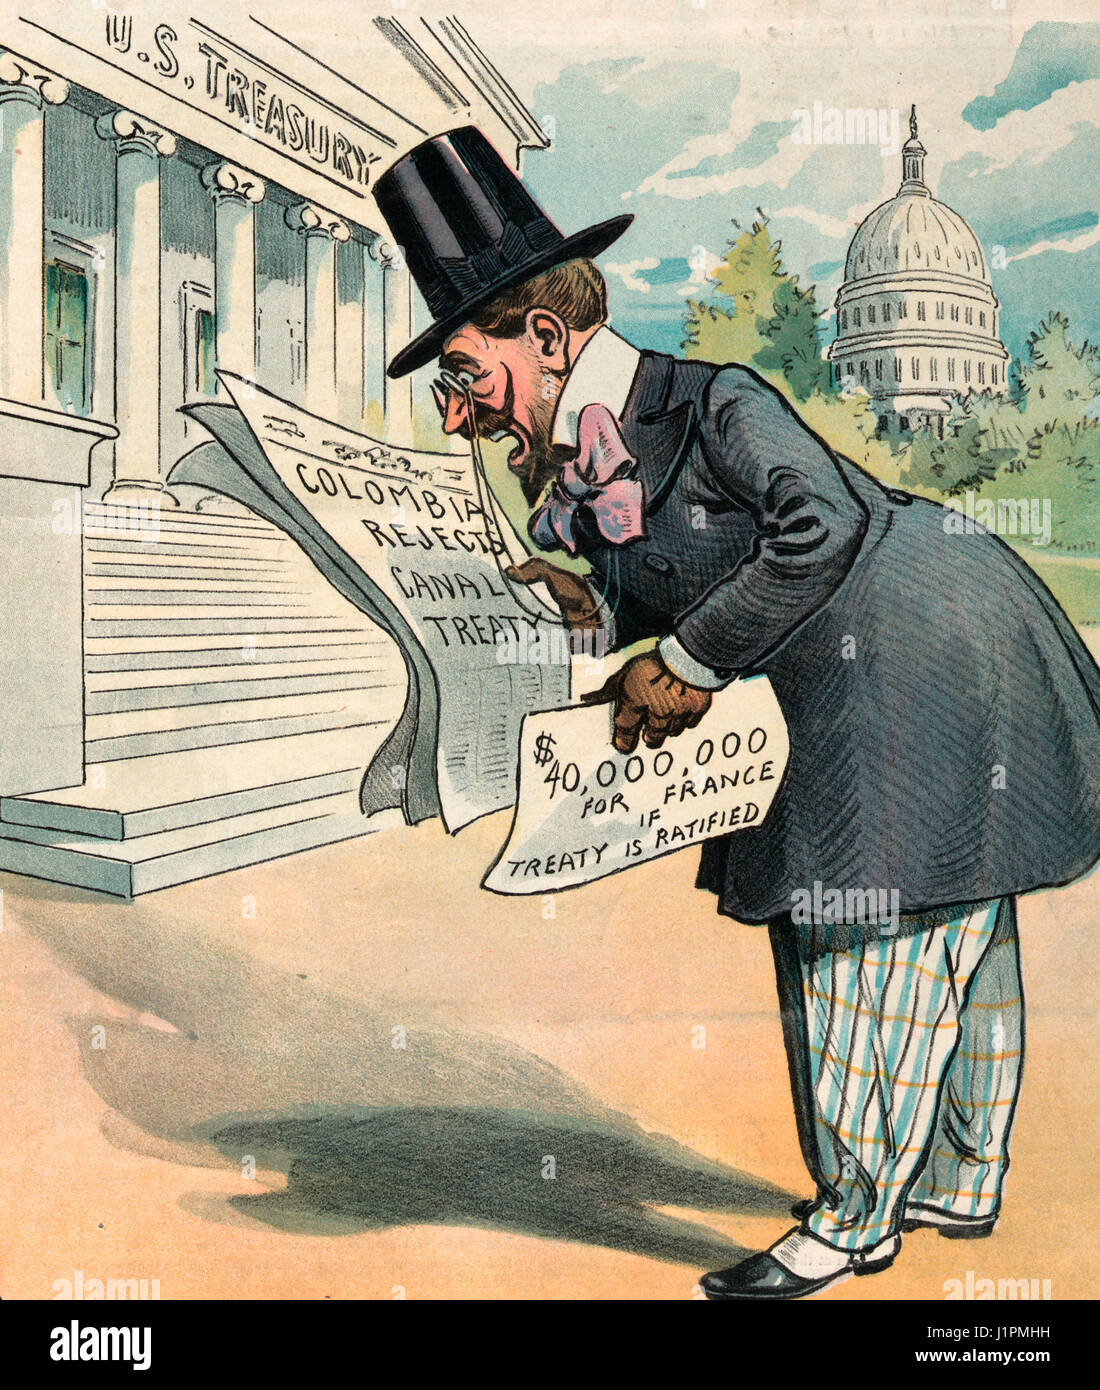 'Sacre bleu!' Illustration shows a Frenchman standing outside the U.S. Treasury building, he is holding in one hand a newspaper that states 'Colombia Rejects Canal Treaty' and in the other hand a paper labeled '40,000,000 for France if Treaty is Ratified'. It appears that he was about to cash-in a promissory note for $40 million, only to discover at the last moment that it is worthless. Political Cartoon, 1903 Stock Photo